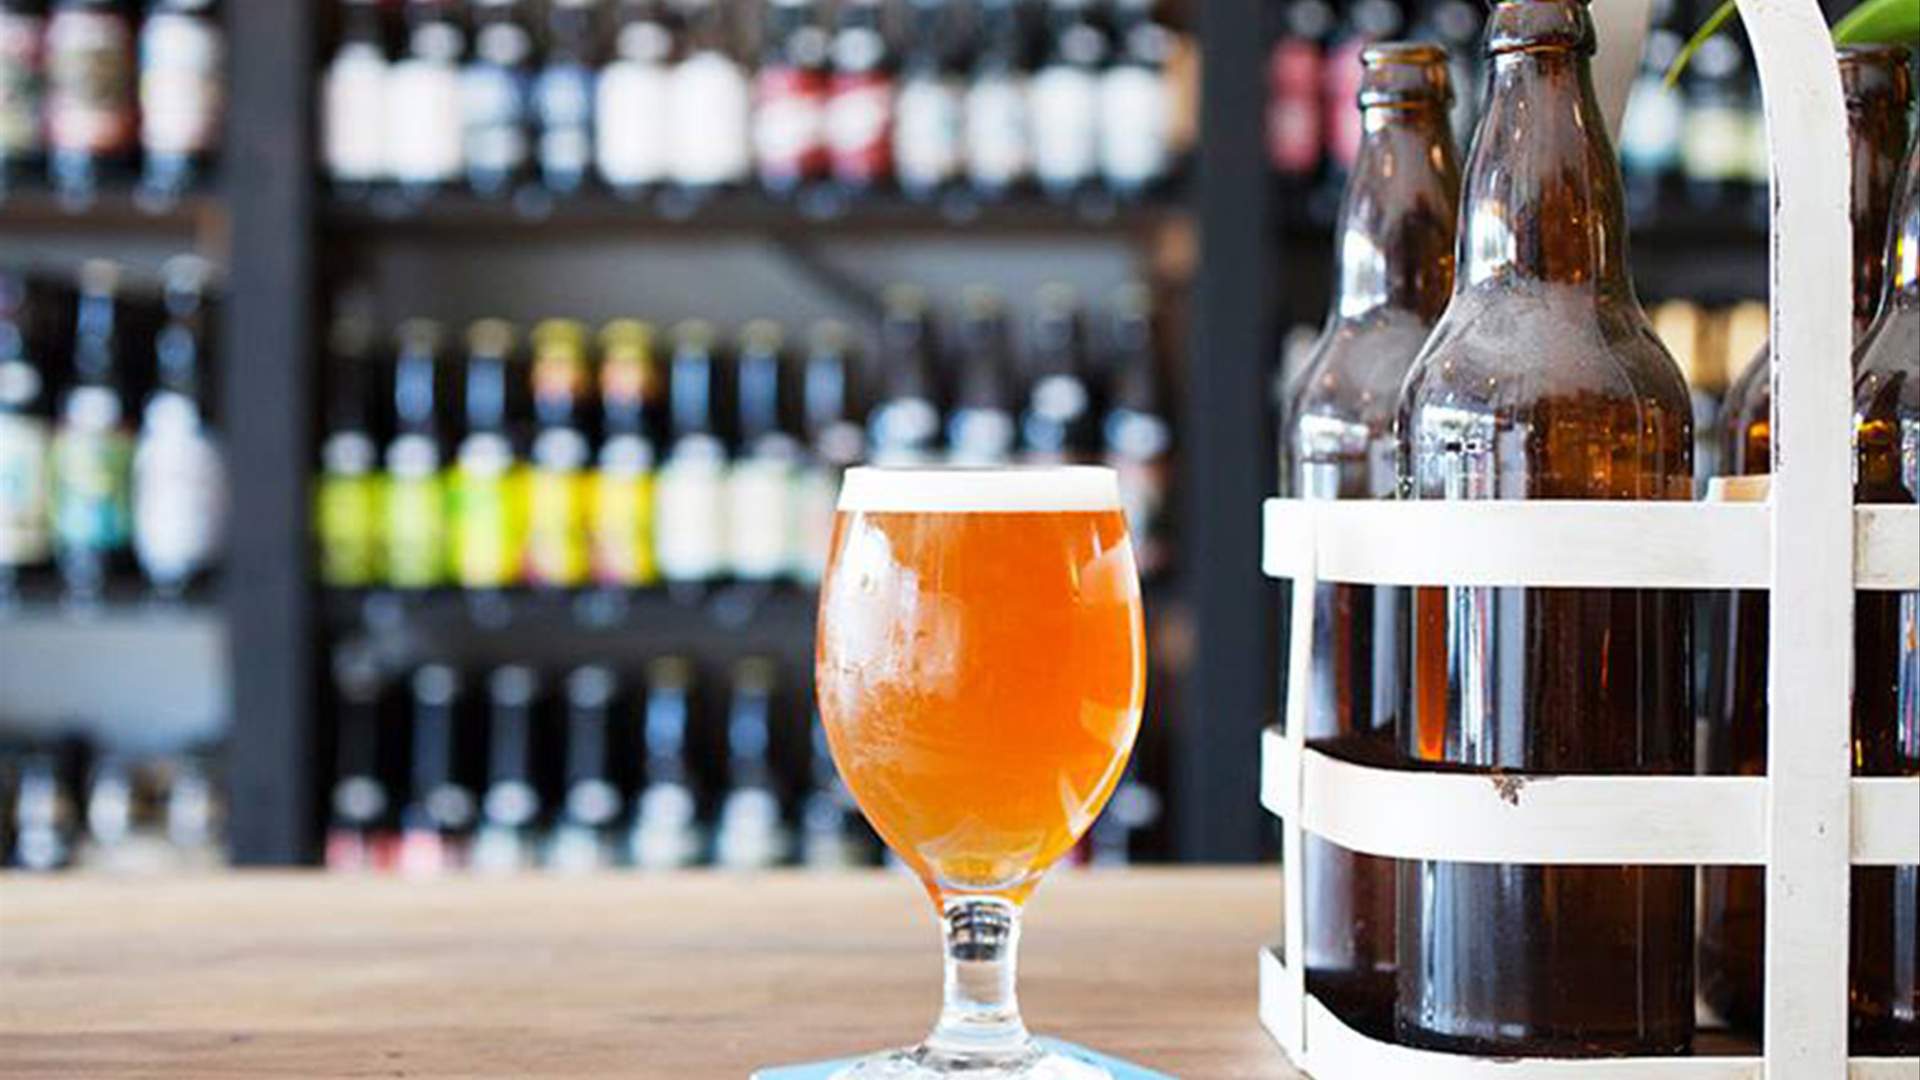 The Ten Best Bottle Shops for Craft Beer in Melbourne - Concrete Playground